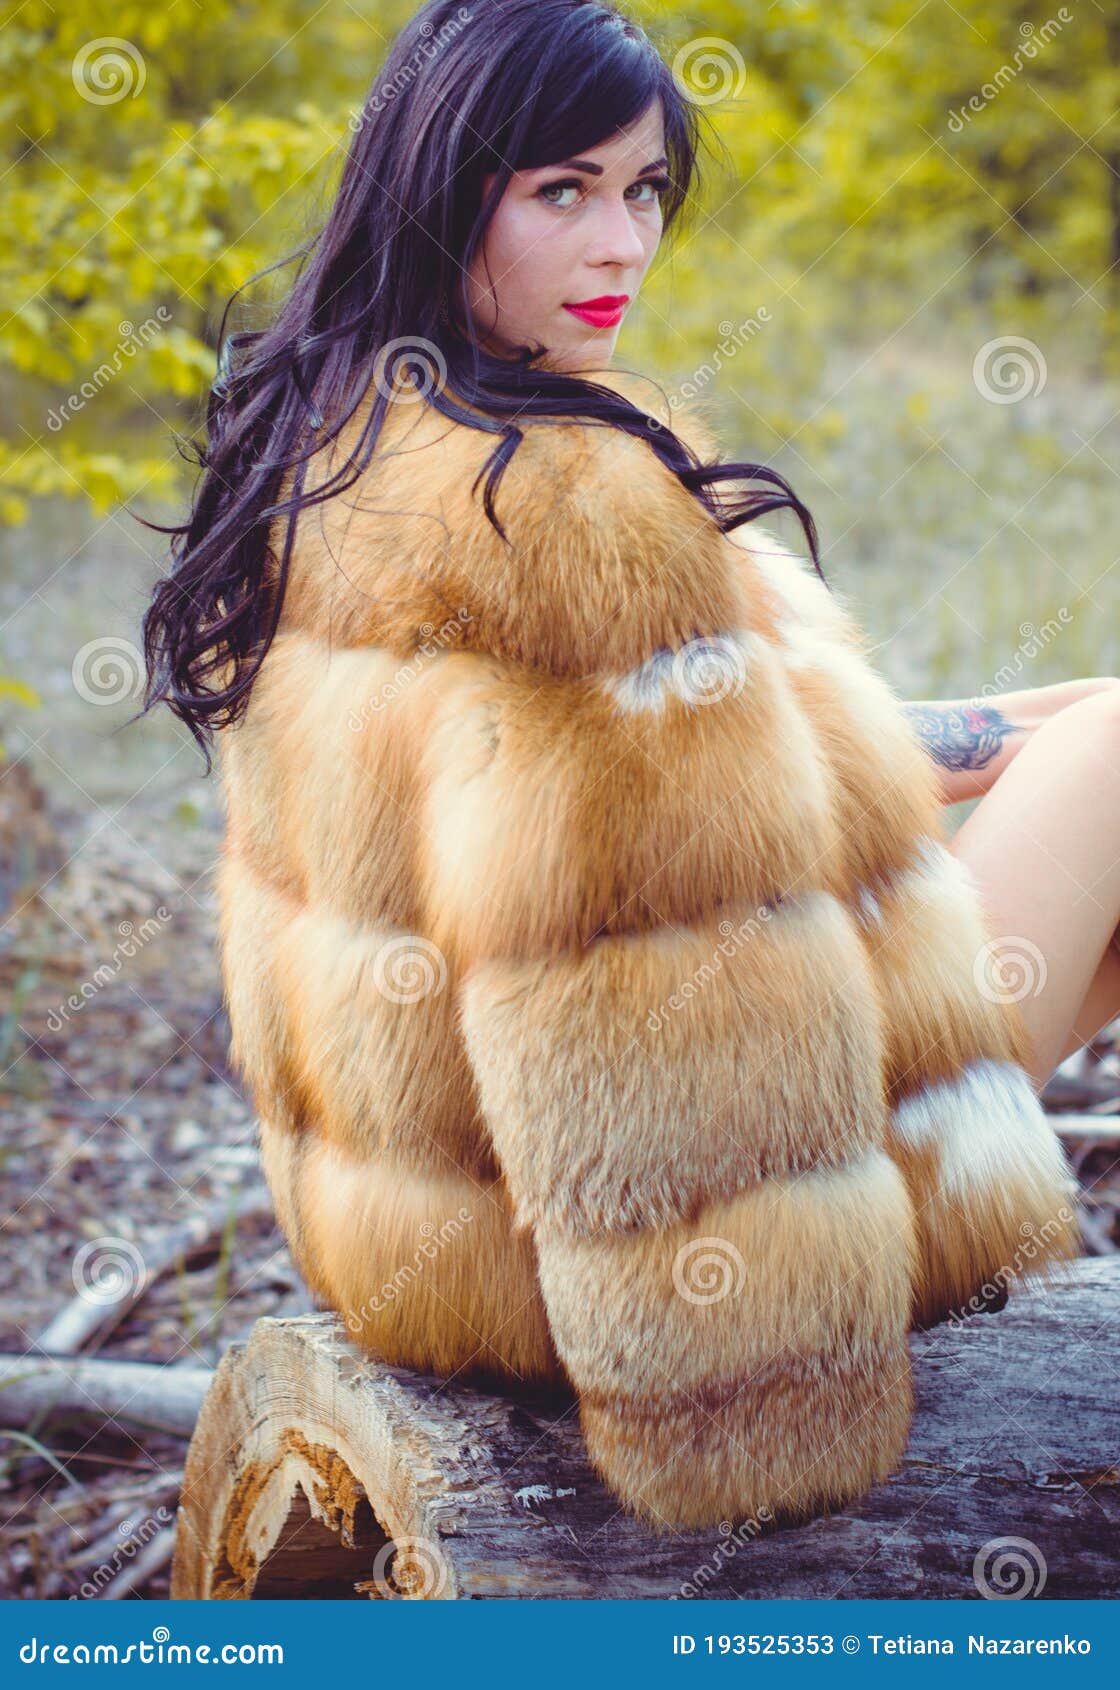 alesia sampson recommends naked under fur coat pic